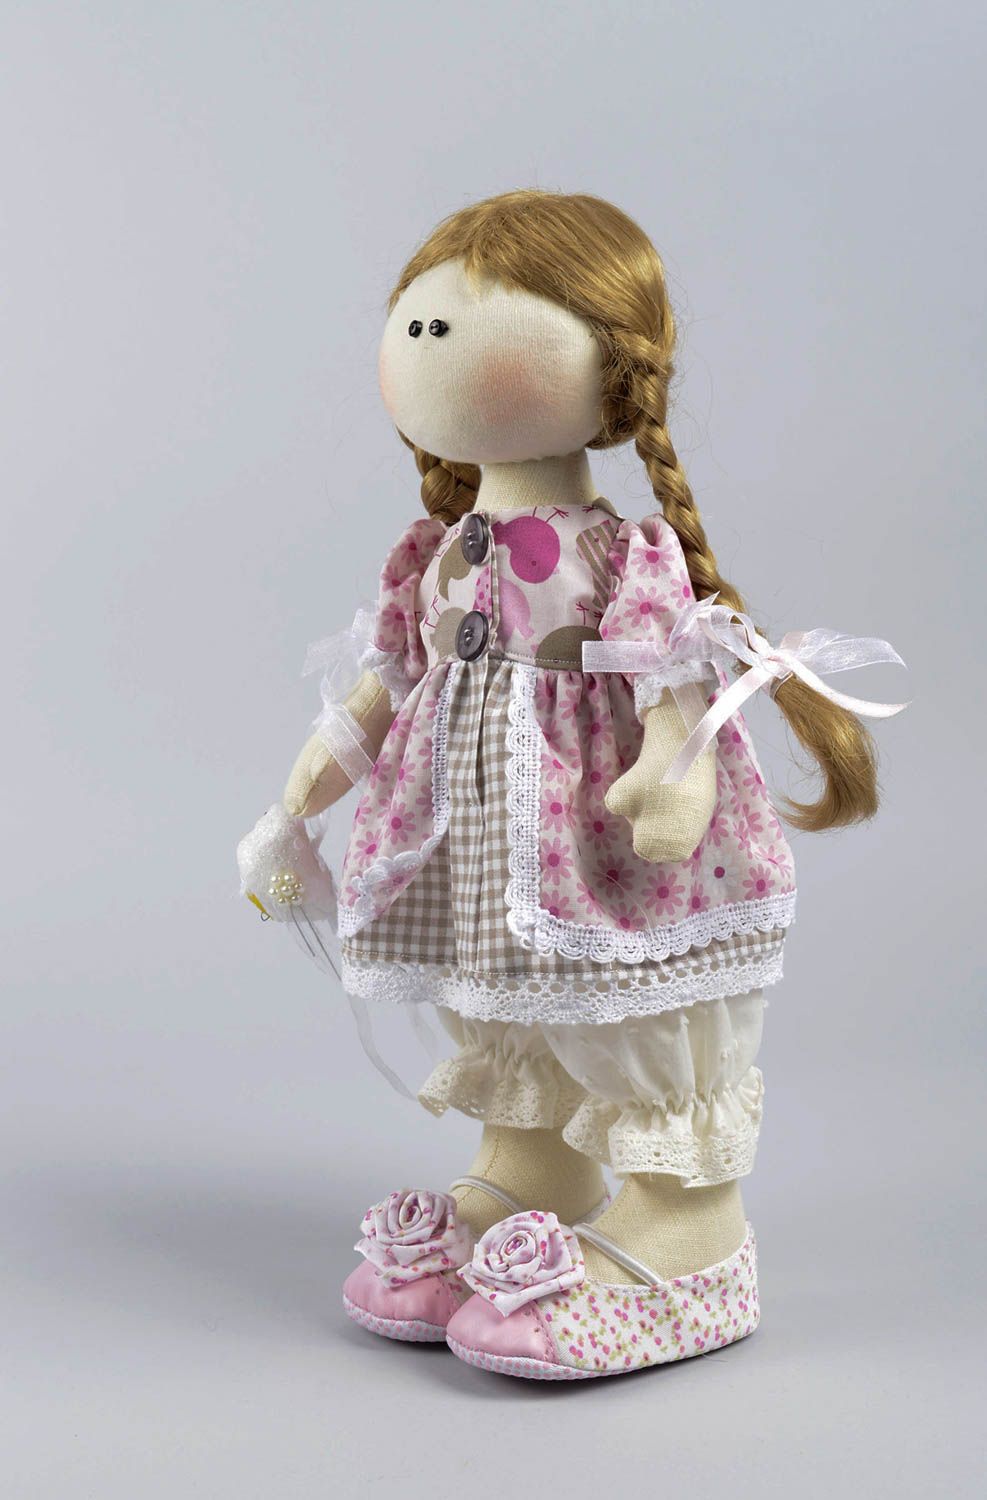 Beautiful handmade rag doll best toys for kids stuffed fabric toy gift ideas photo 3